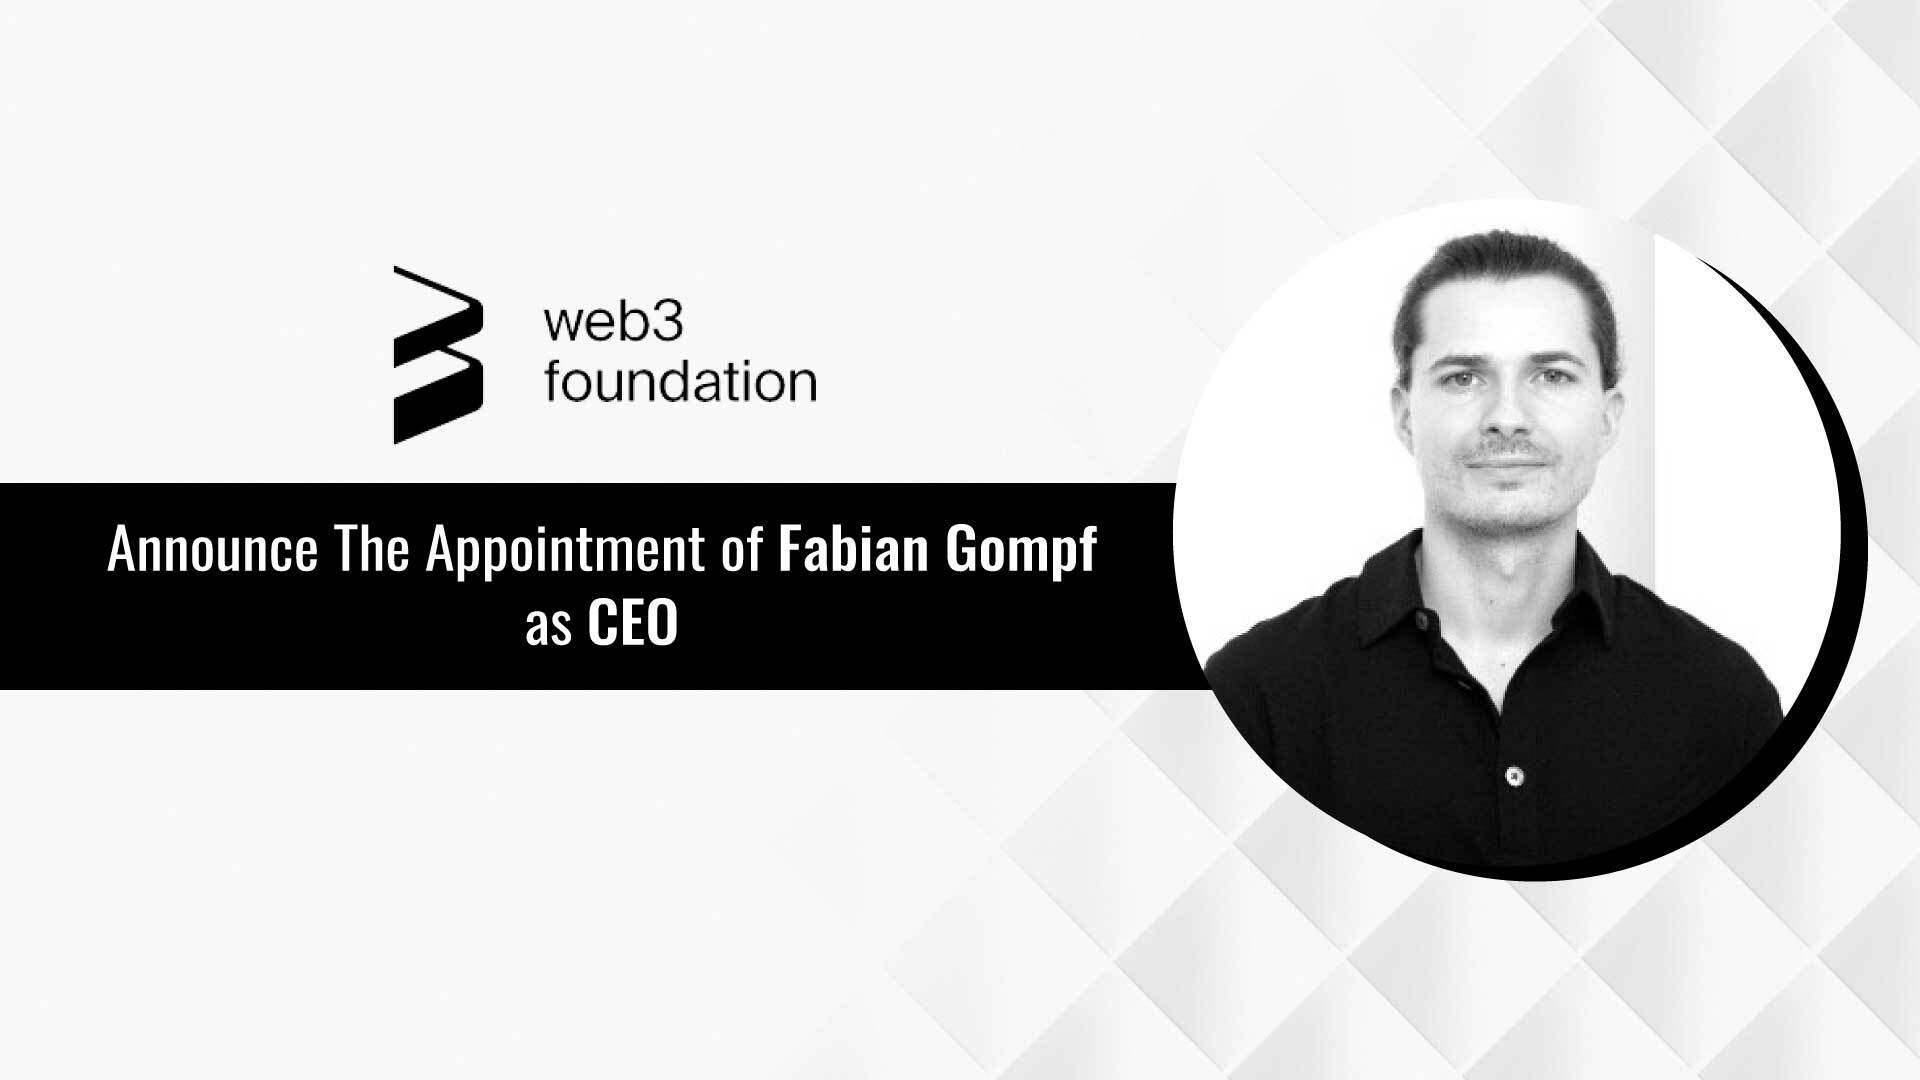 Web3 Foundation Announces Appointment of Fabian Gompf as CEO